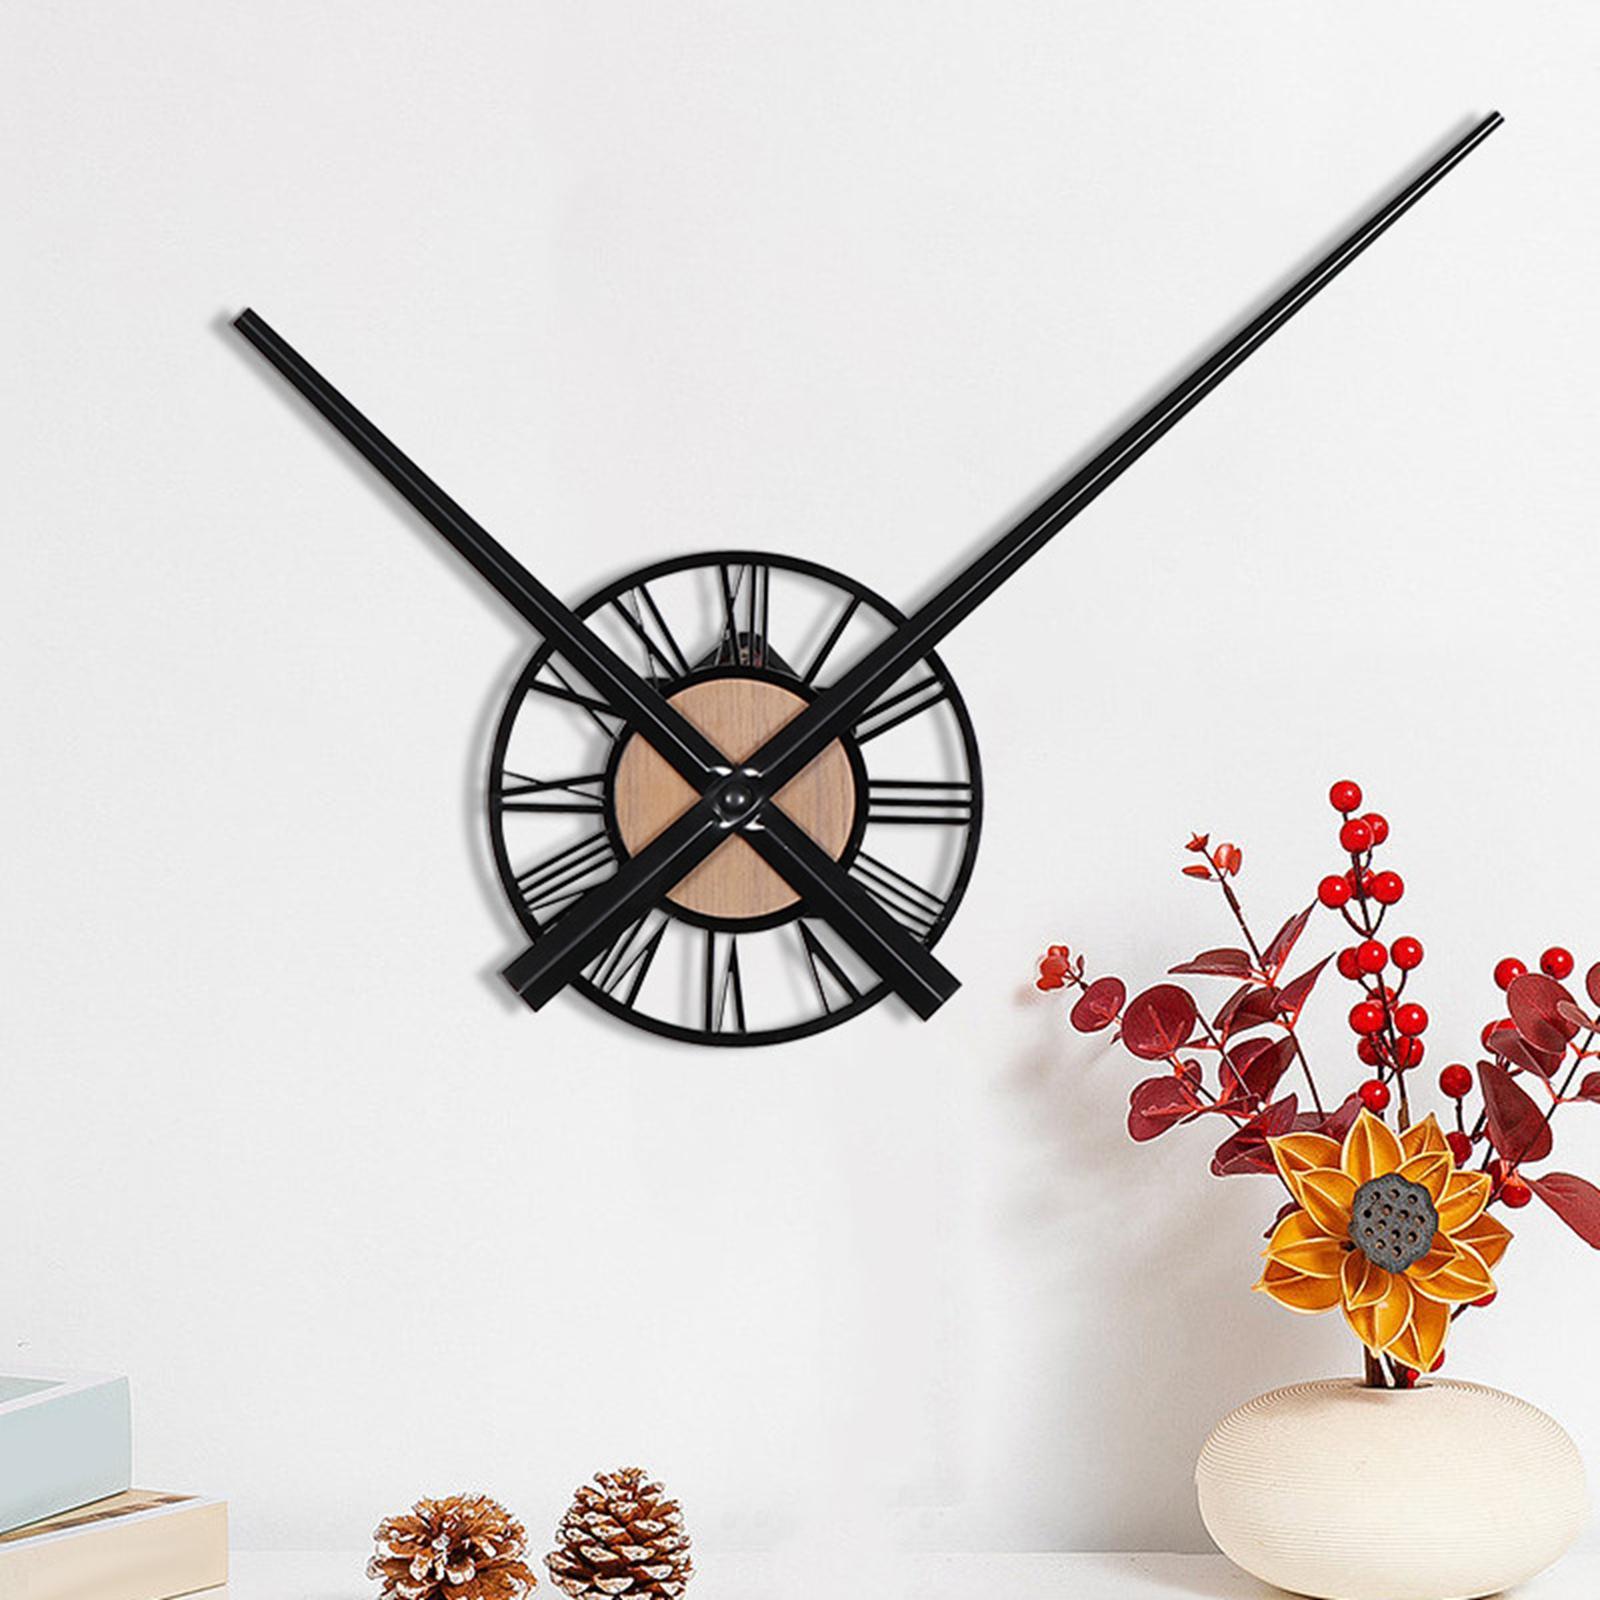 Decorative Wall Clock Analog Clock 12 inch Silent Wall Watch Round Decor Roman Numeral Clock Hanging Clock for Farmhouse Office Indoor Home